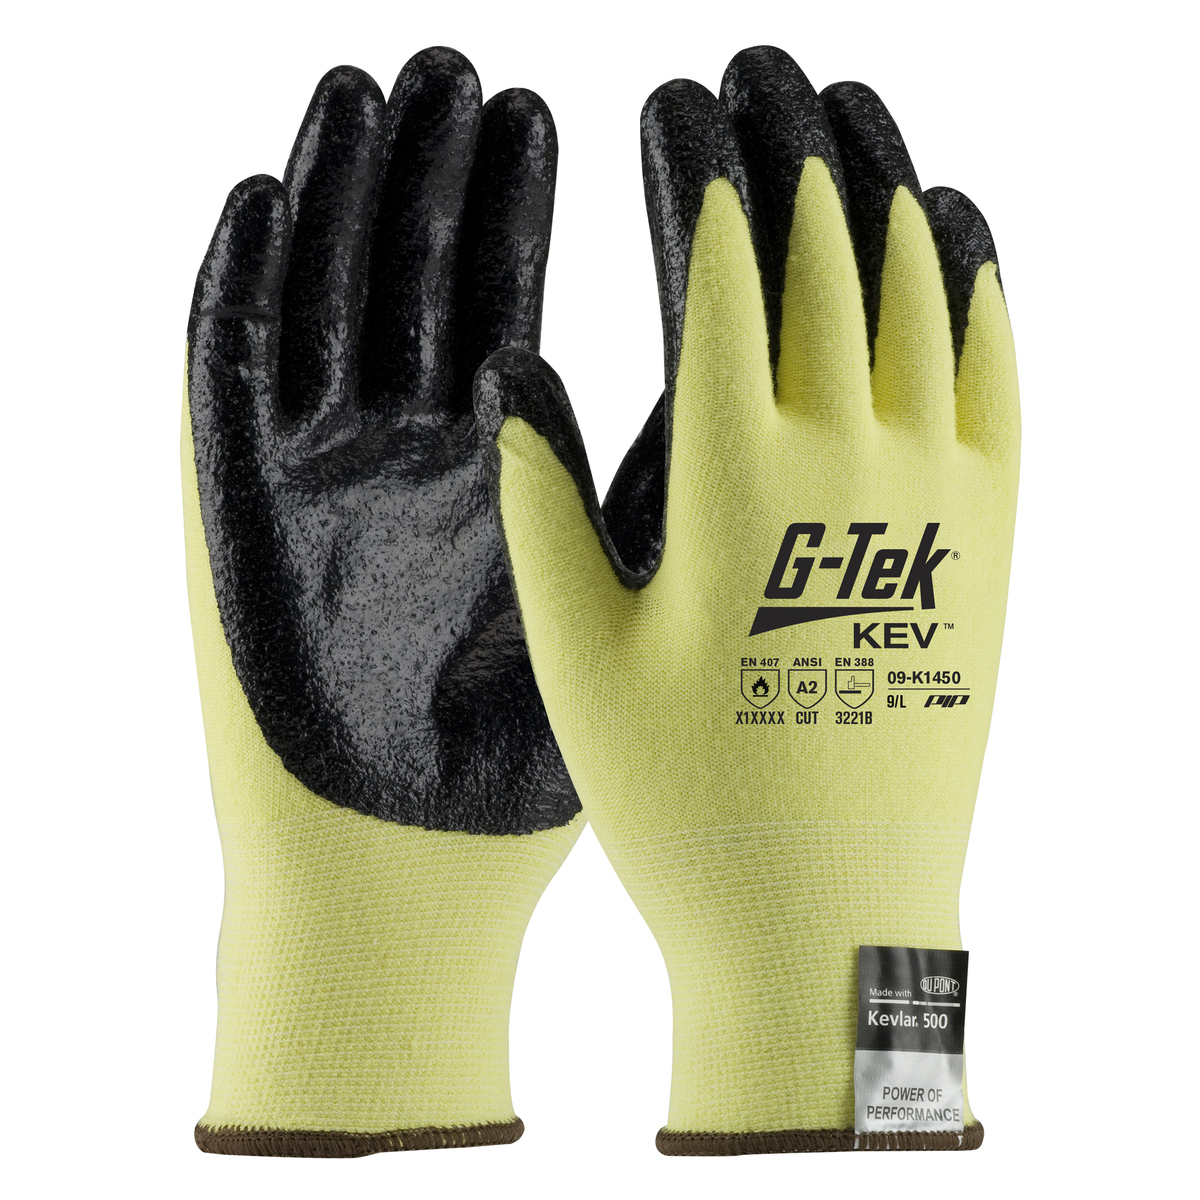 Made with KEVLAR CUT RESISTANT WORK GLOVES W/NITRILE COATING SIZE Small 1 PAIR 